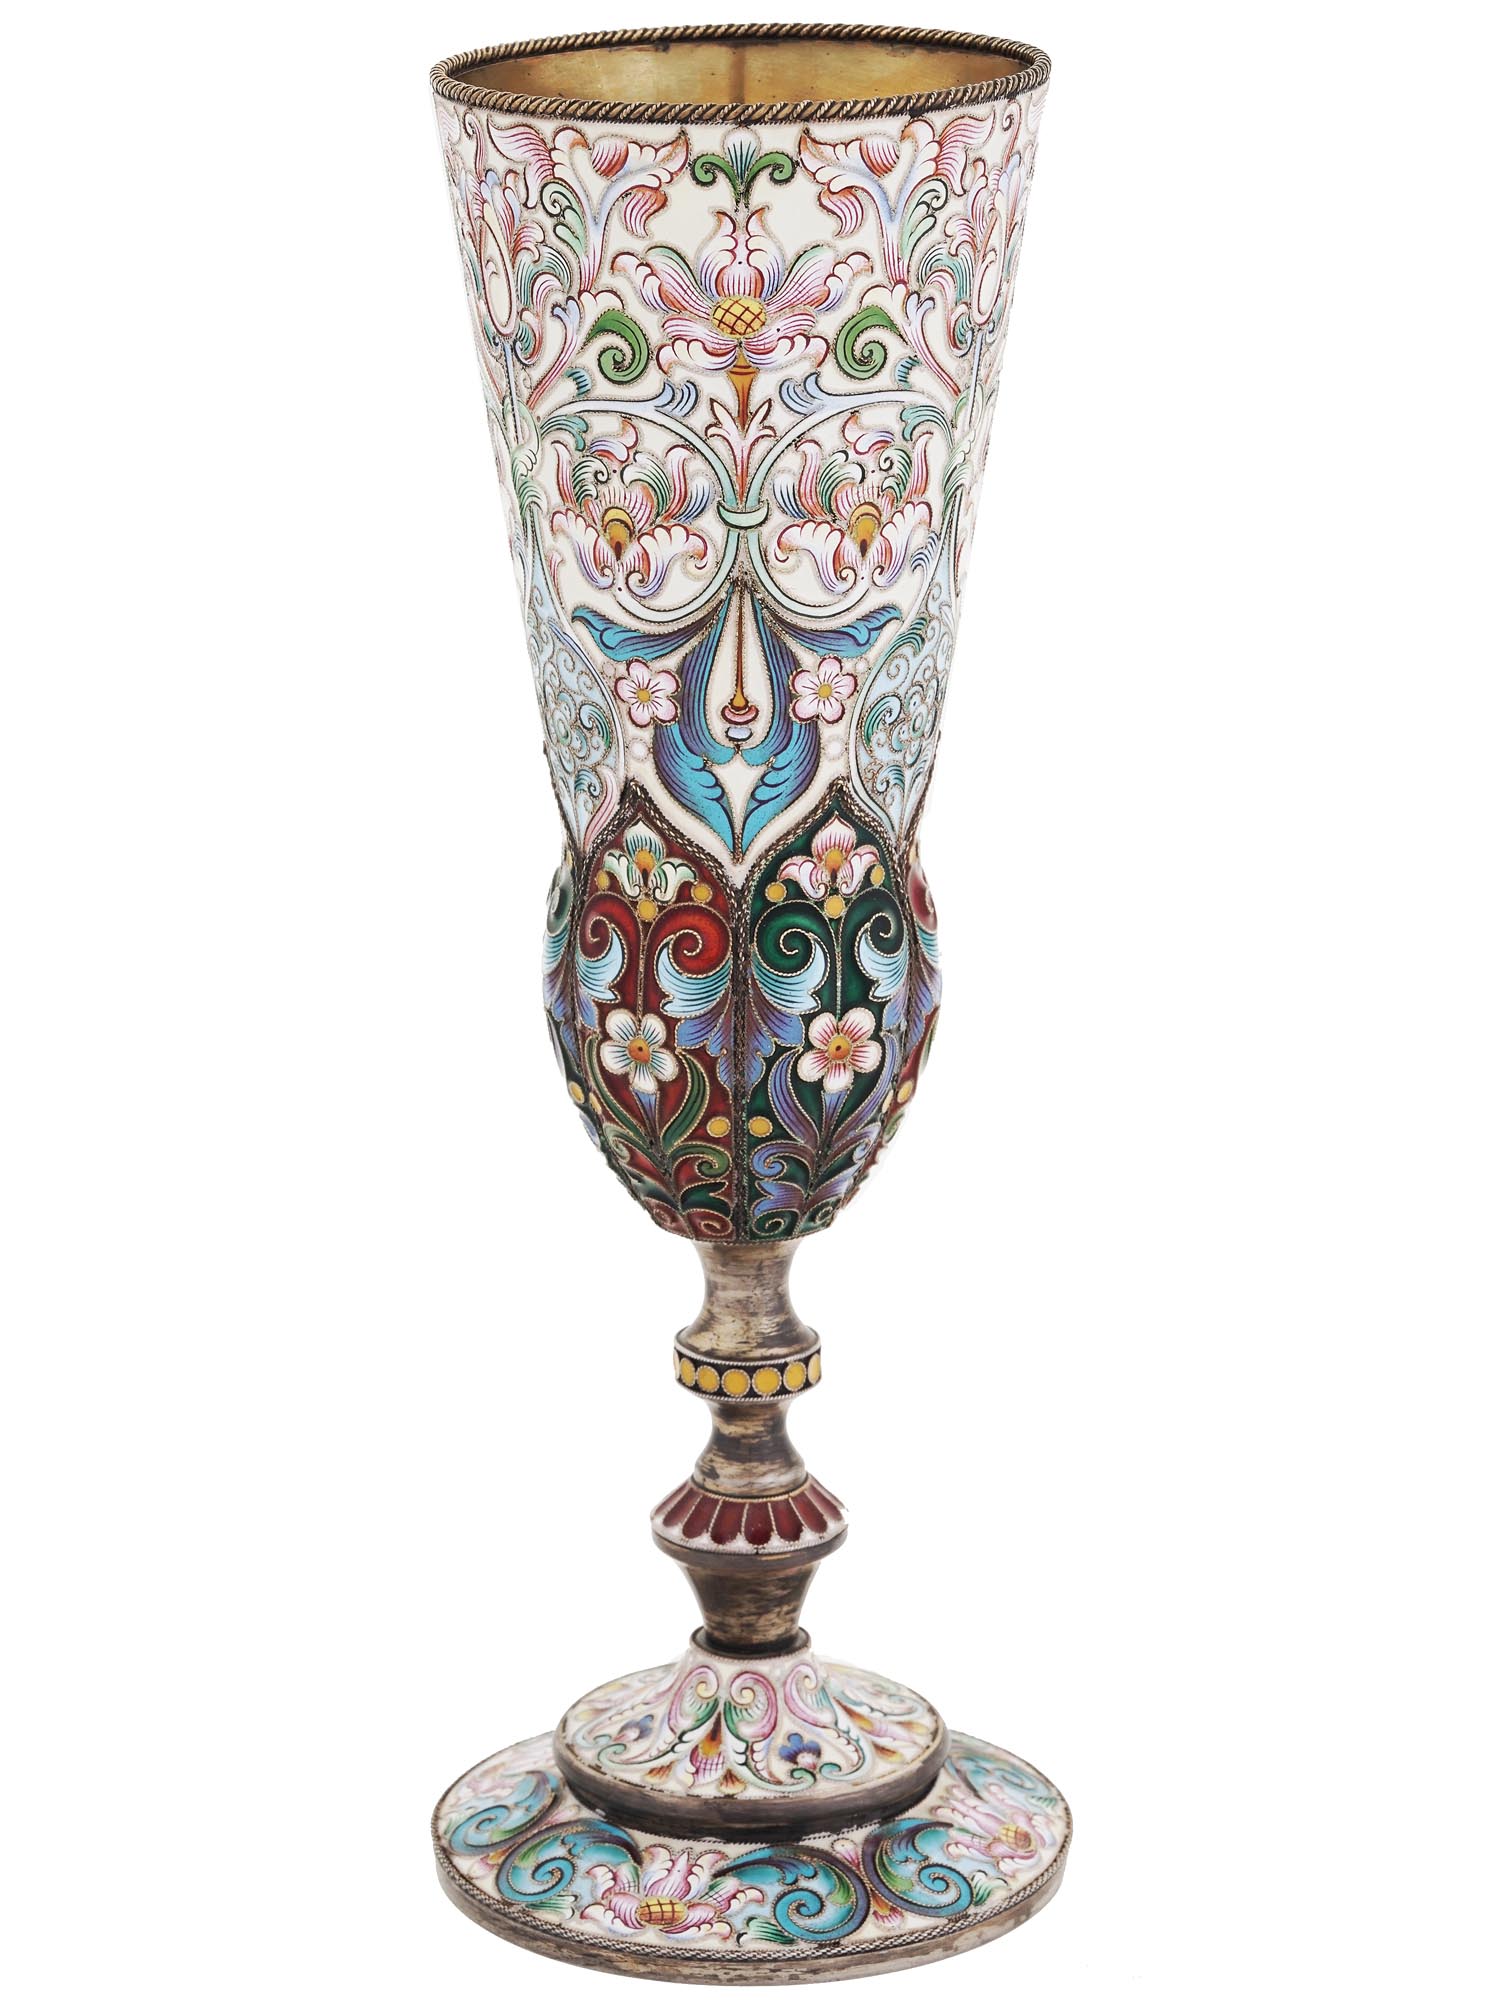 TALL RUSSIAN 88 SILVER CLOISONNE ENAMEL GOBLET PIC-2